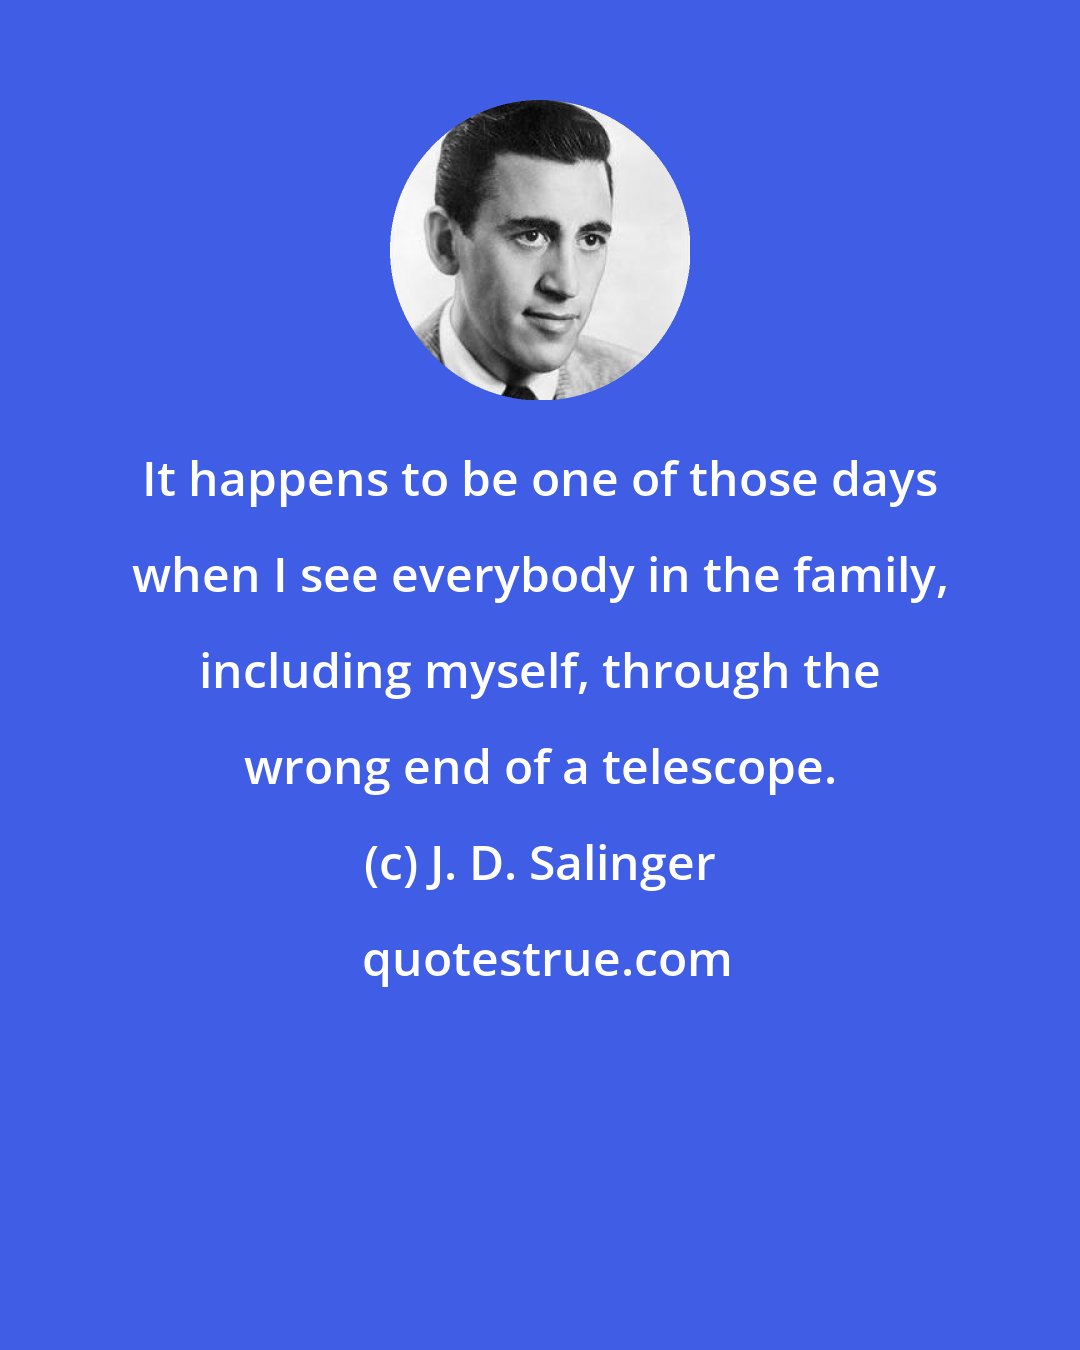 J. D. Salinger: It happens to be one of those days when I see everybody in the family, including myself, through the wrong end of a telescope.